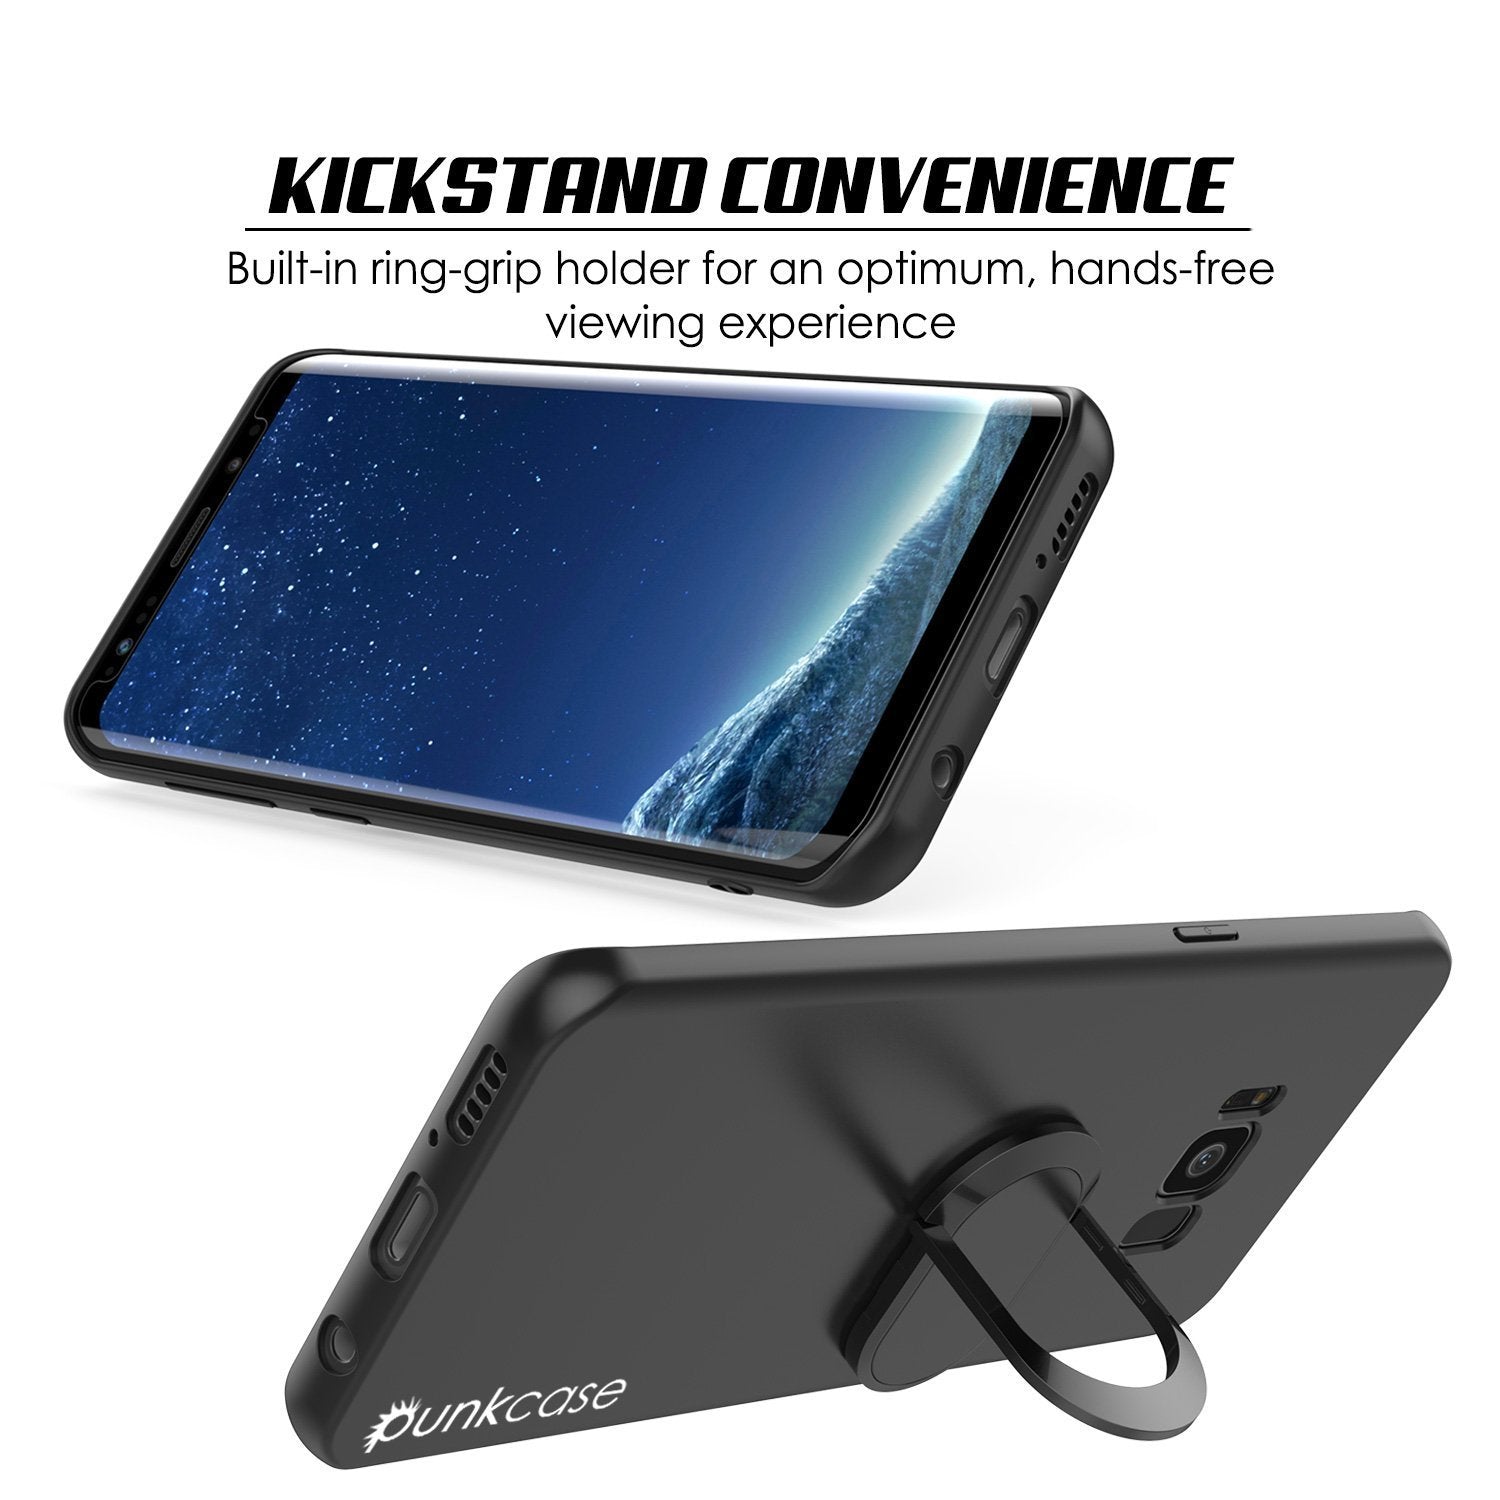 Galaxy S8 Case, Punkcase Magnetix Protective TPU Cover W/ Kickstand, Screen Protector [Black] - PunkCase NZ